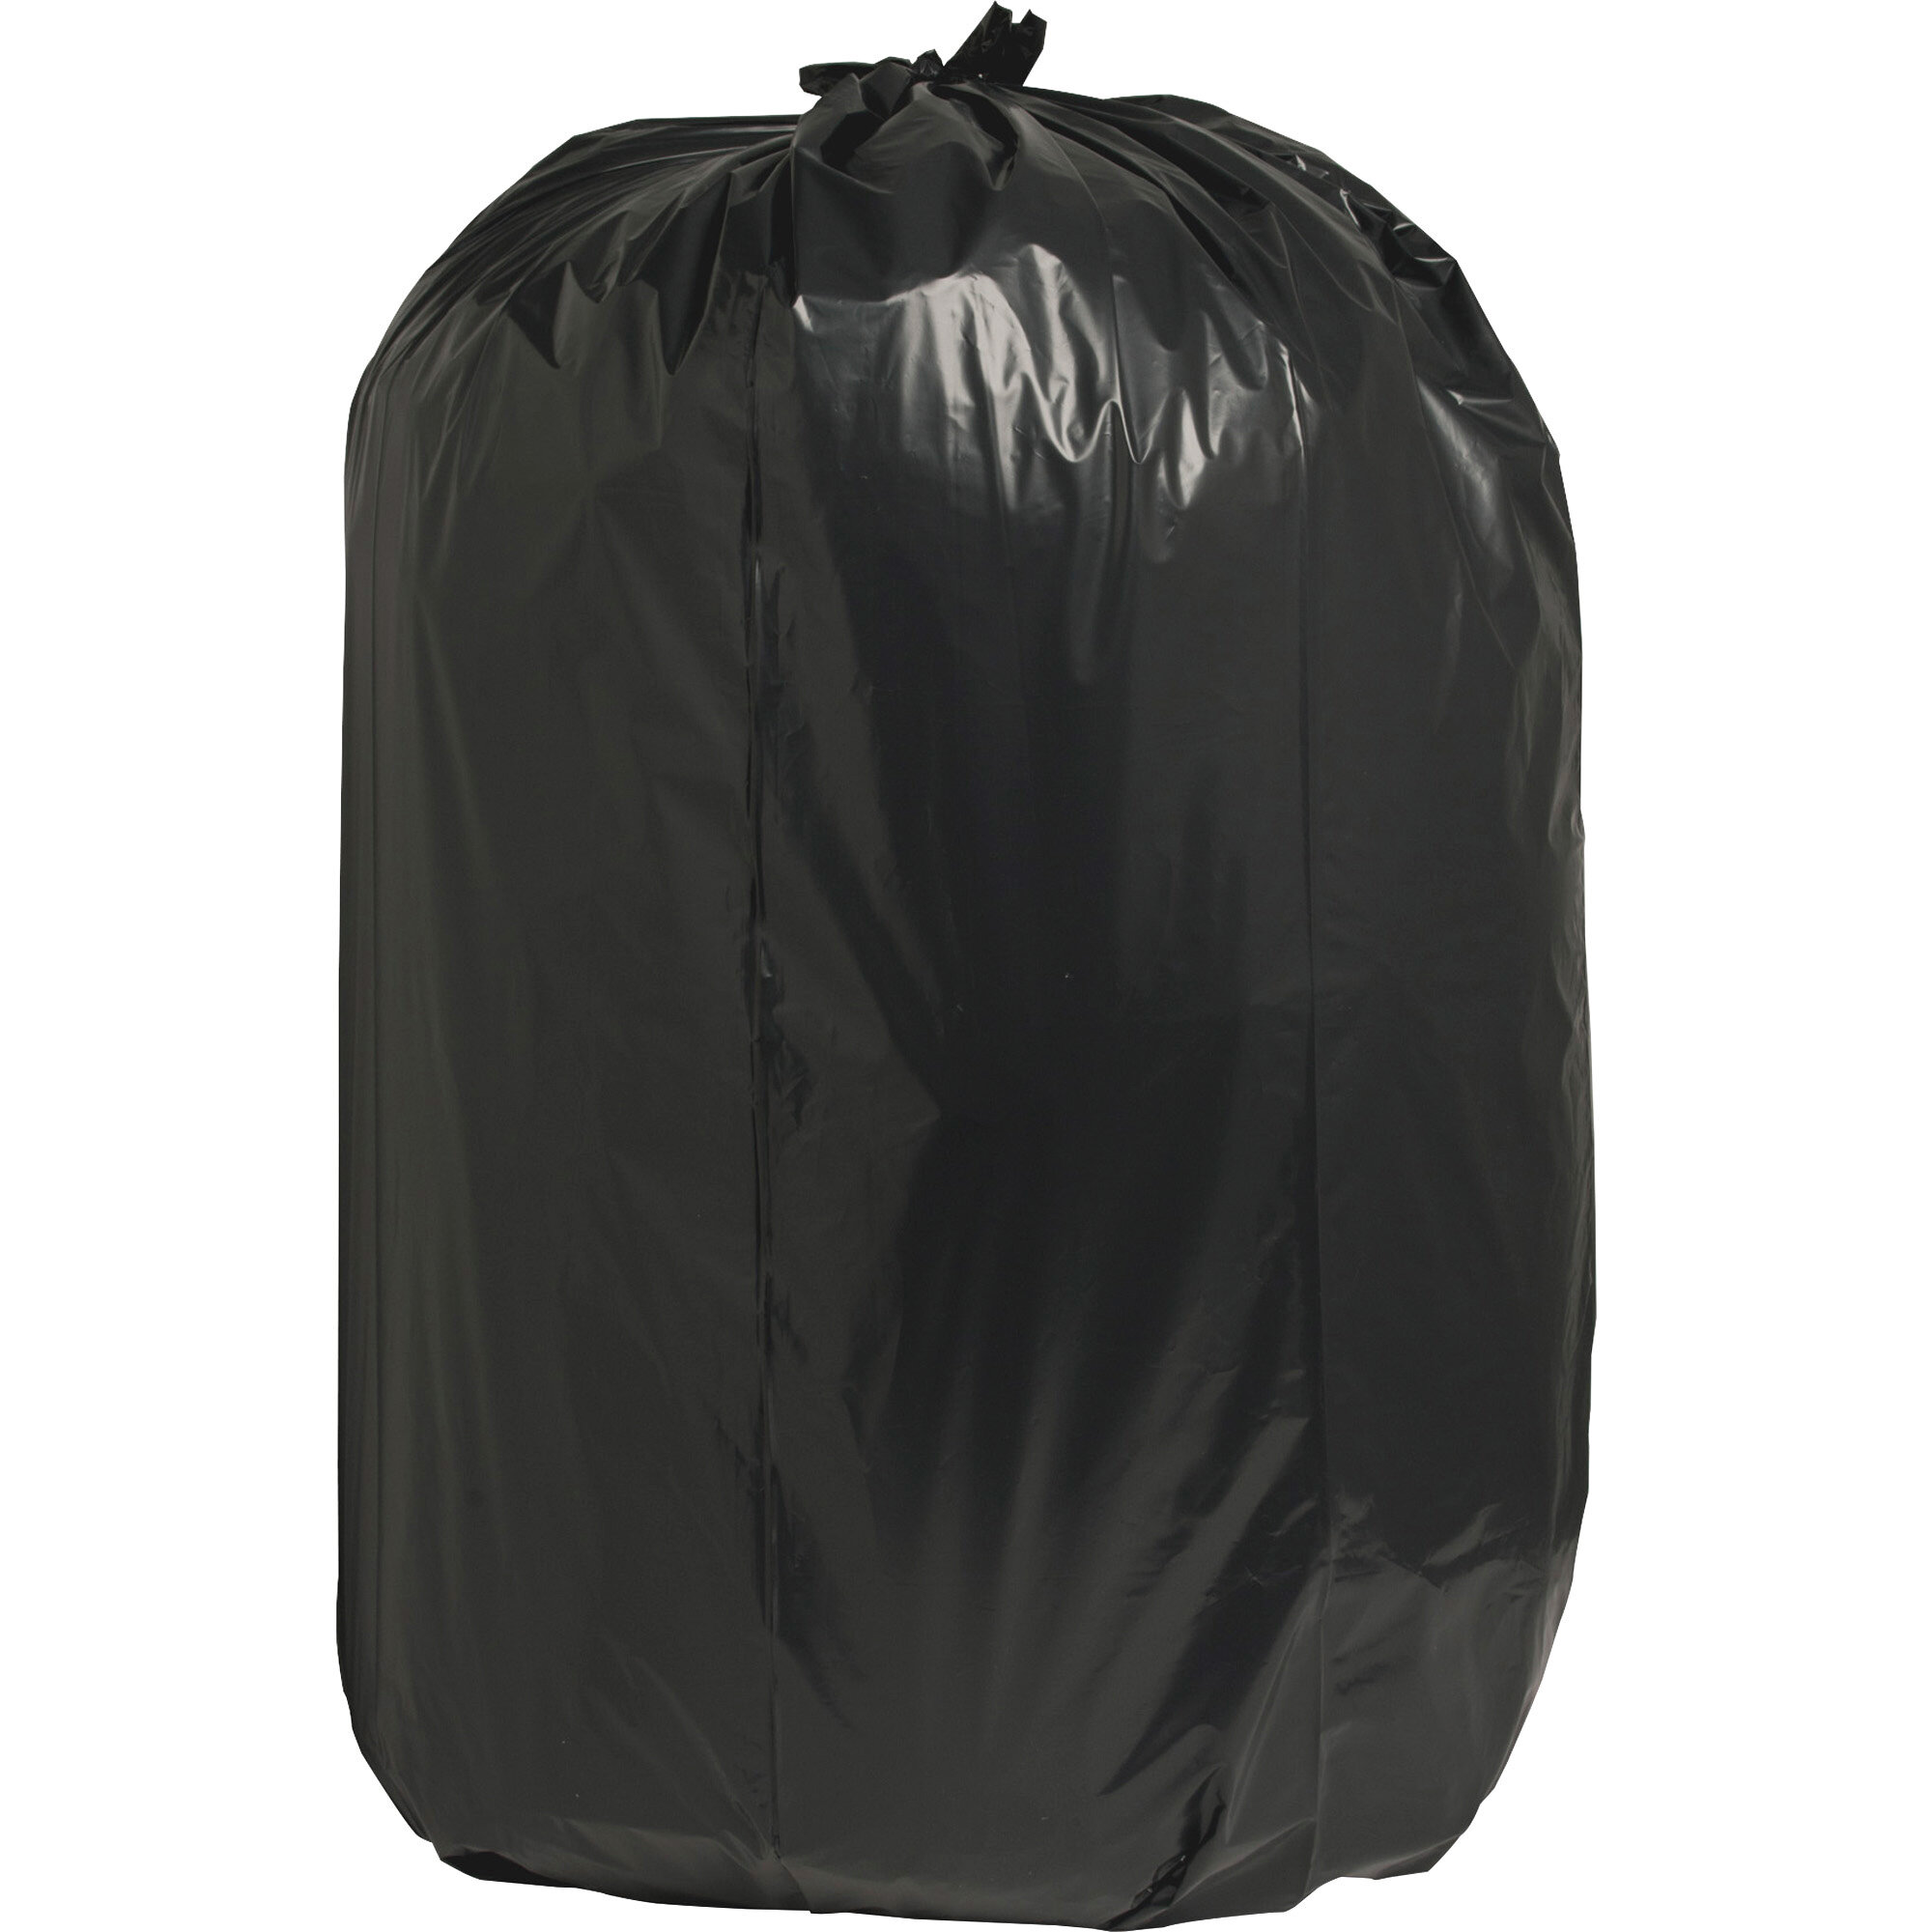 Nature Saver 60 Gallons Plastic Trash Bags - 100 Count